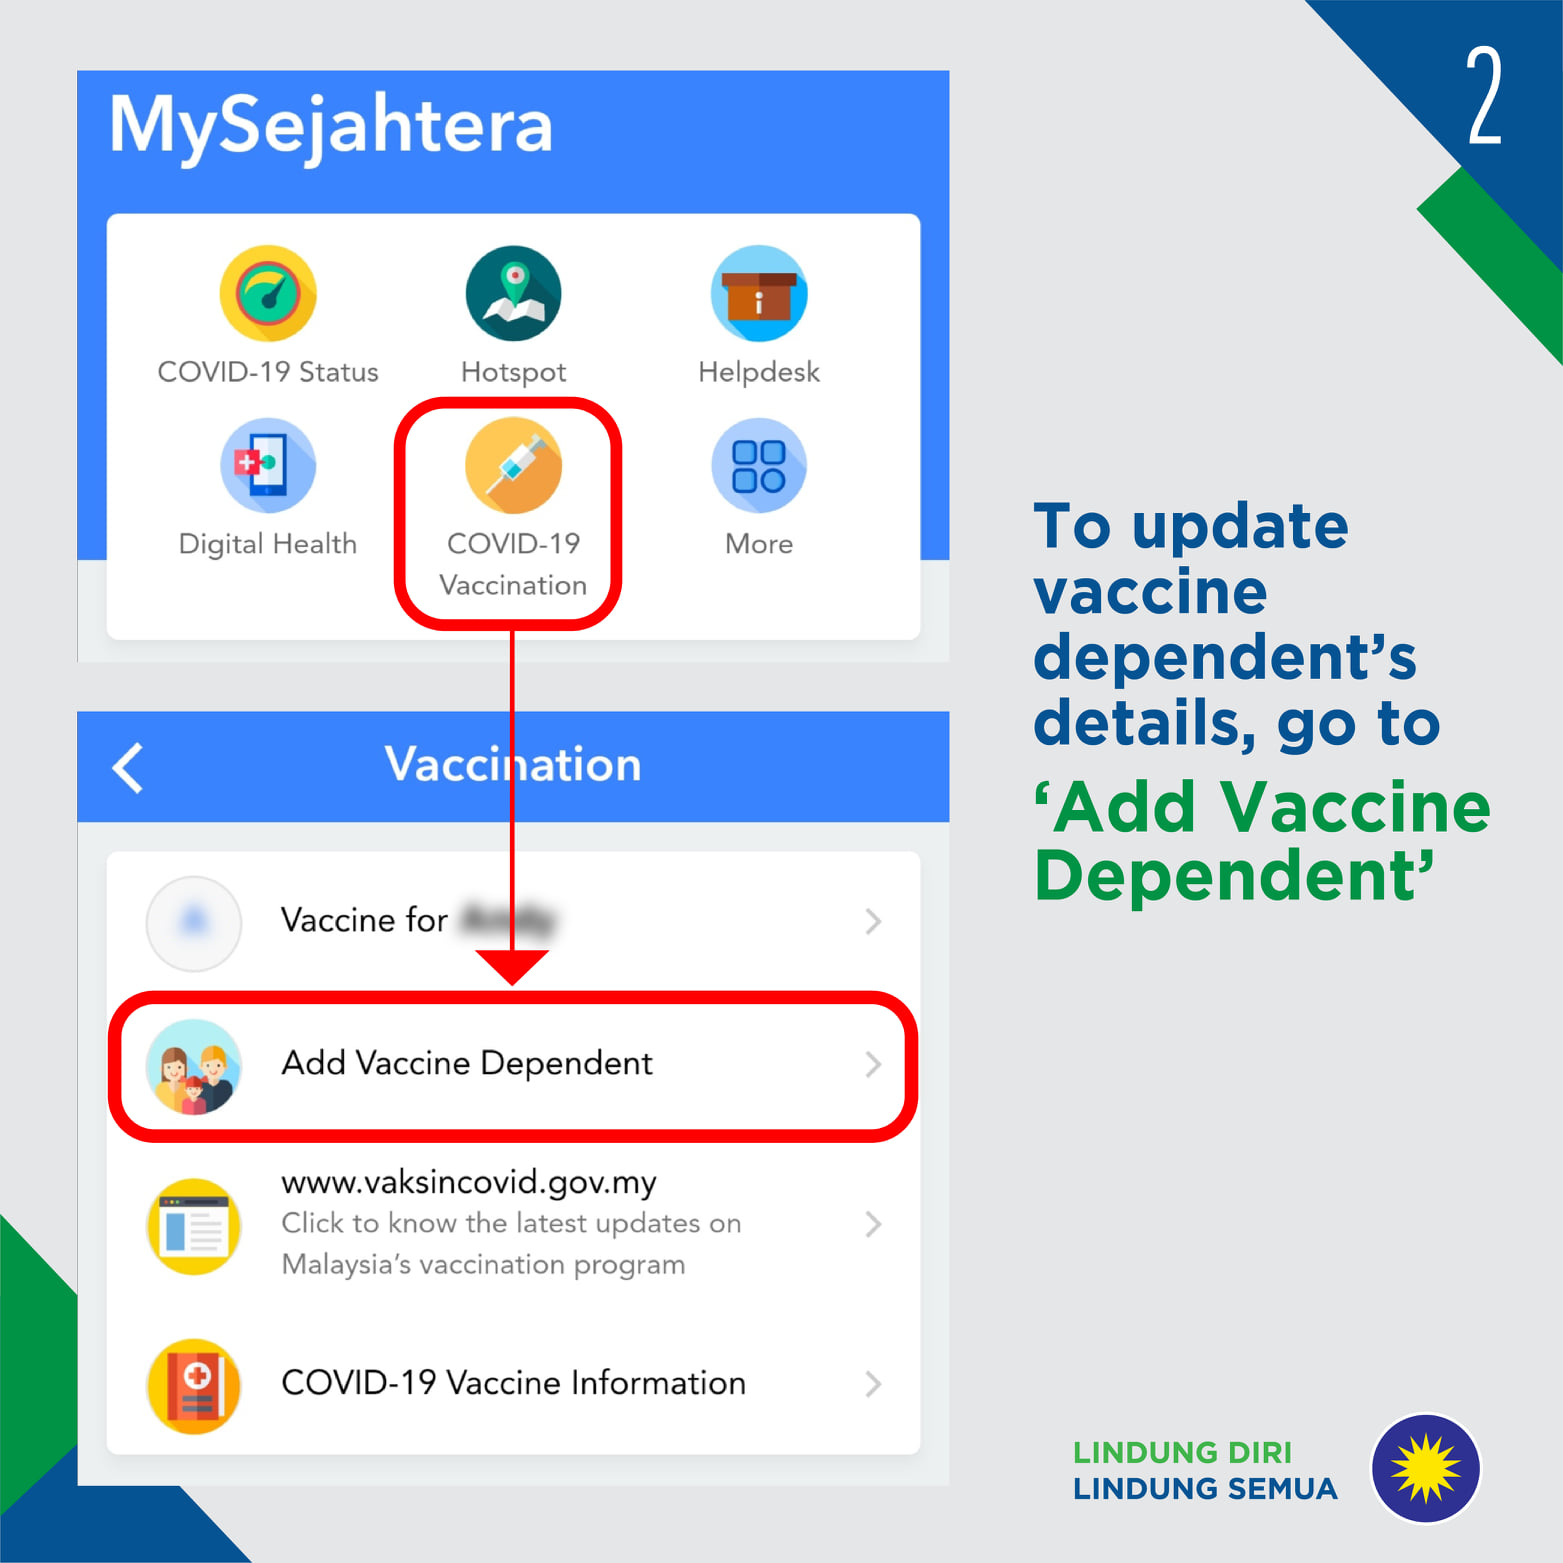 How to register for vaccine on mysejahtera